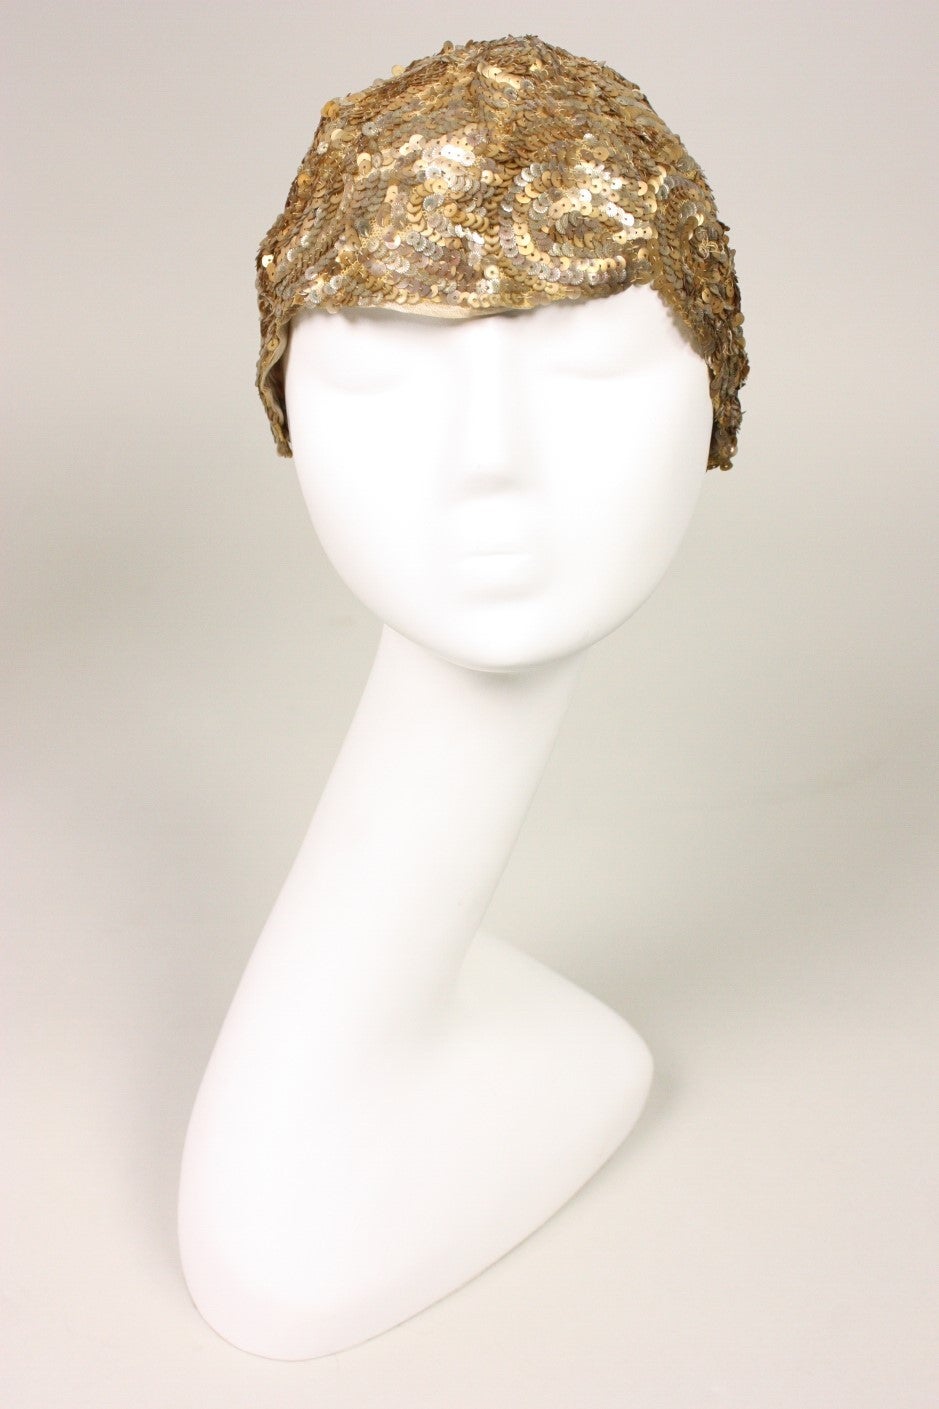 Vintage skull cap dates to the Art Deco era during the 1930's.  It is fully covered with gold-toned metallic sequins.  Lined.

Interior Circumference: 21